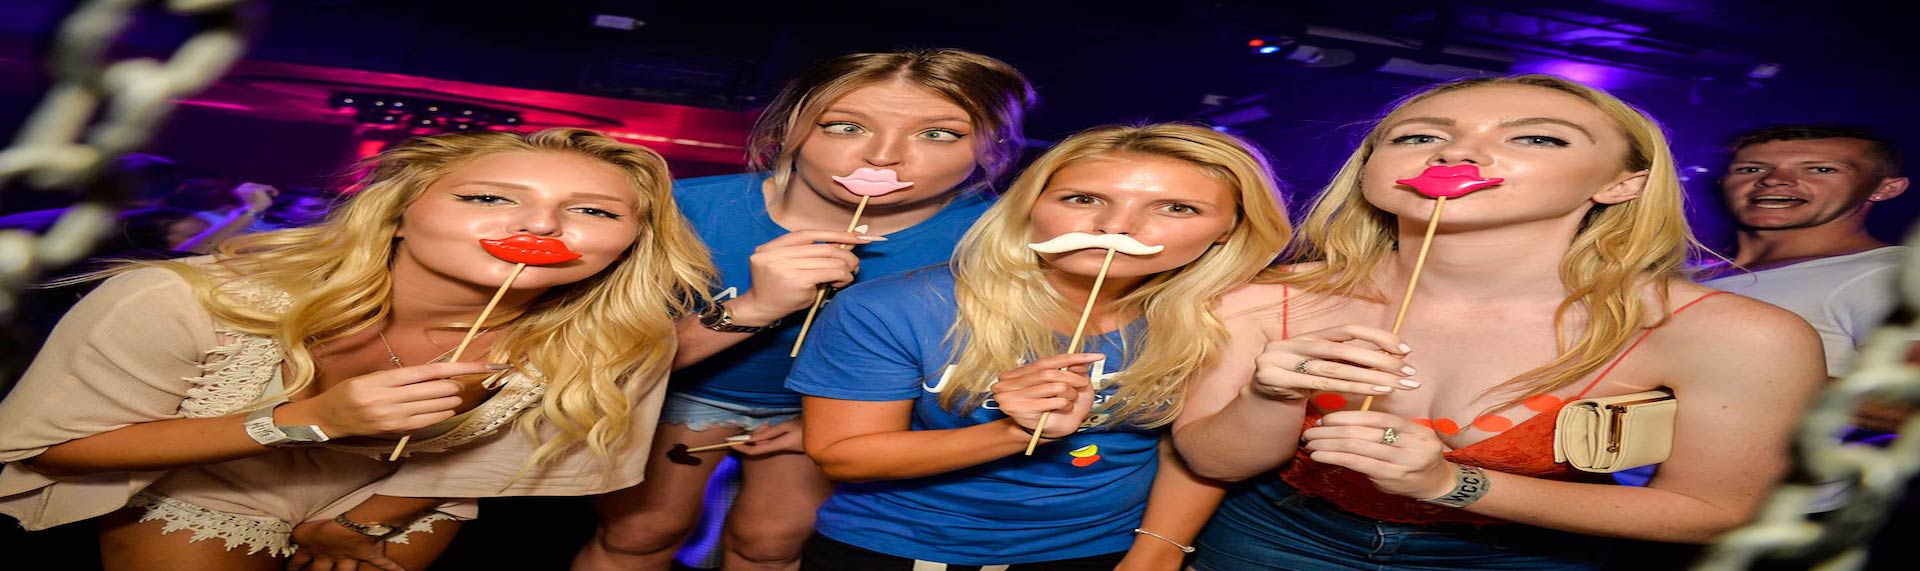 Group of girls on pub crawl holding funny props to their mouths